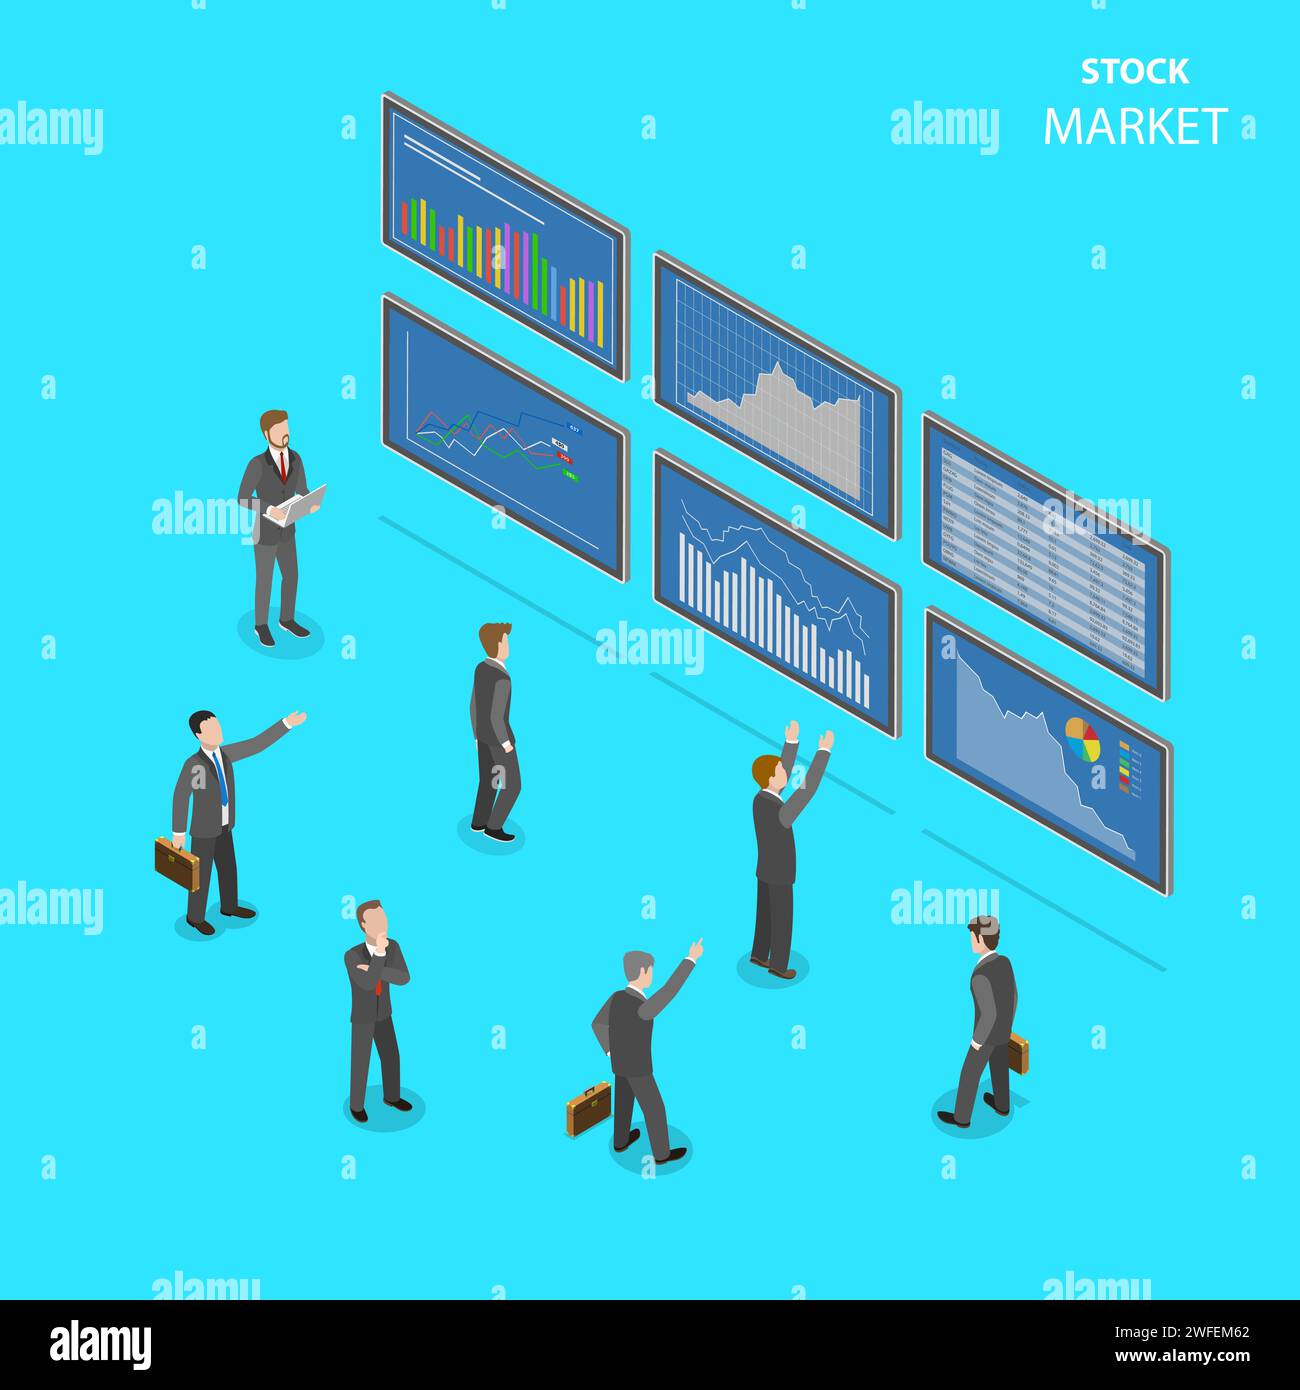 Stock market flat isometric vector concept. People in suits are standing in front of big information boards with some financial data at them. Stock Vector